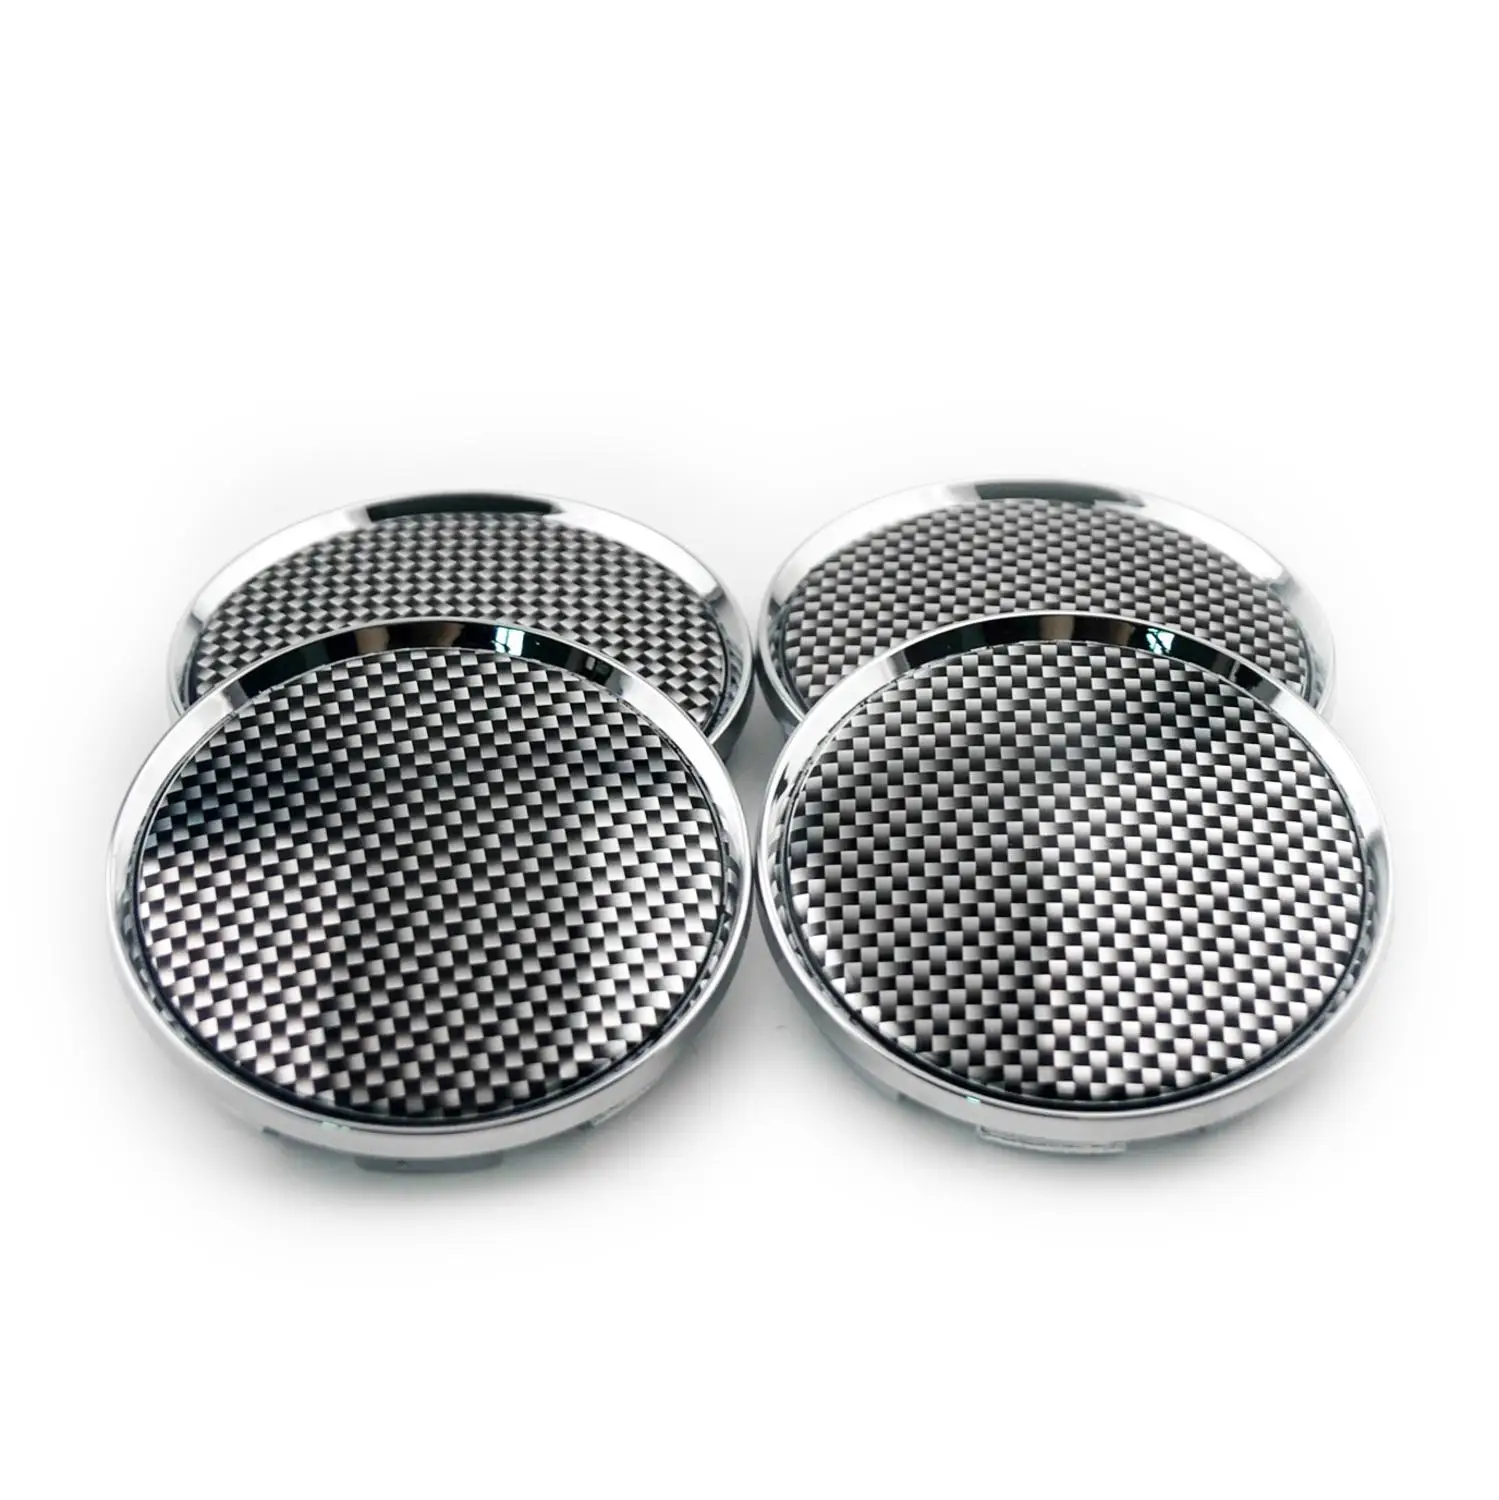 

4pcs 63mm 57mm Grid Black Silver Car Wheel Center Cover Rims Without Emblem Auto Tuning Universal Hub Caps For Alloy Wheels